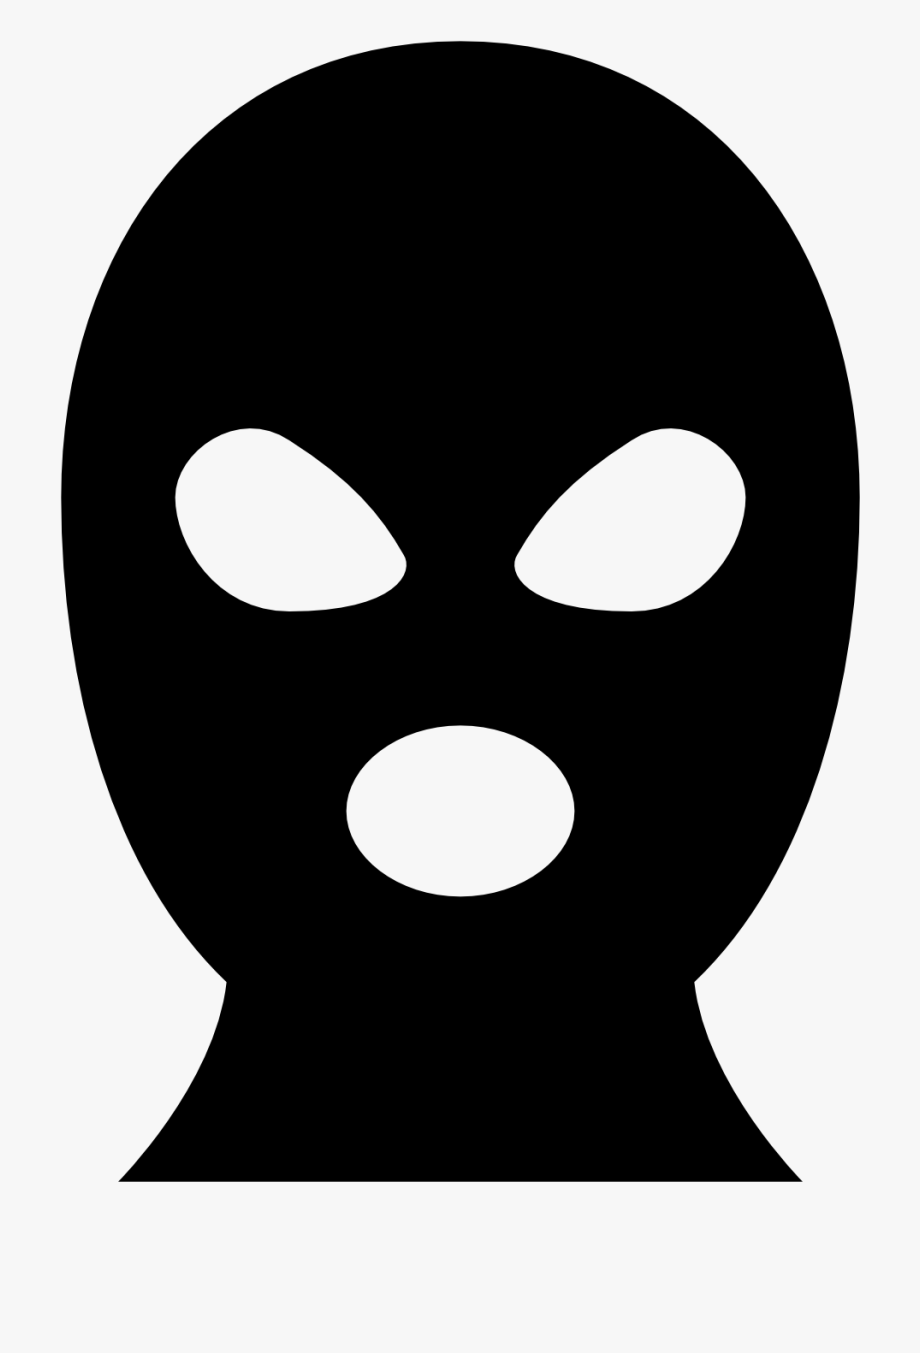 Mask Icon at Vectorified.com | Collection of Mask Icon free for ...